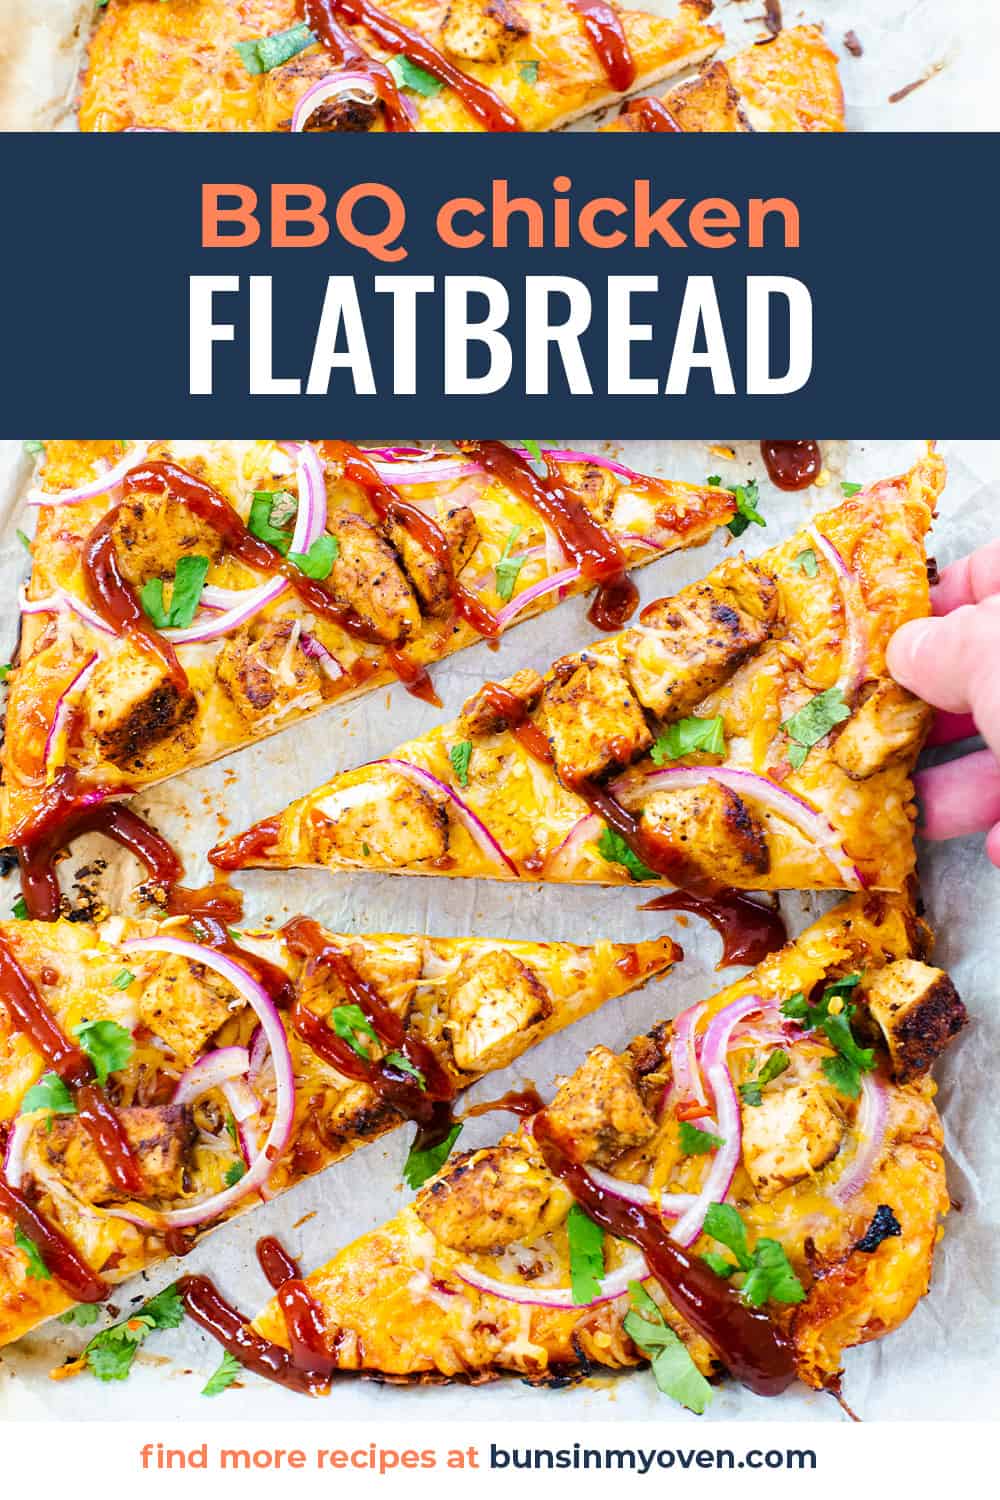 BBQ chicken flatbread picture with text for pinterest.